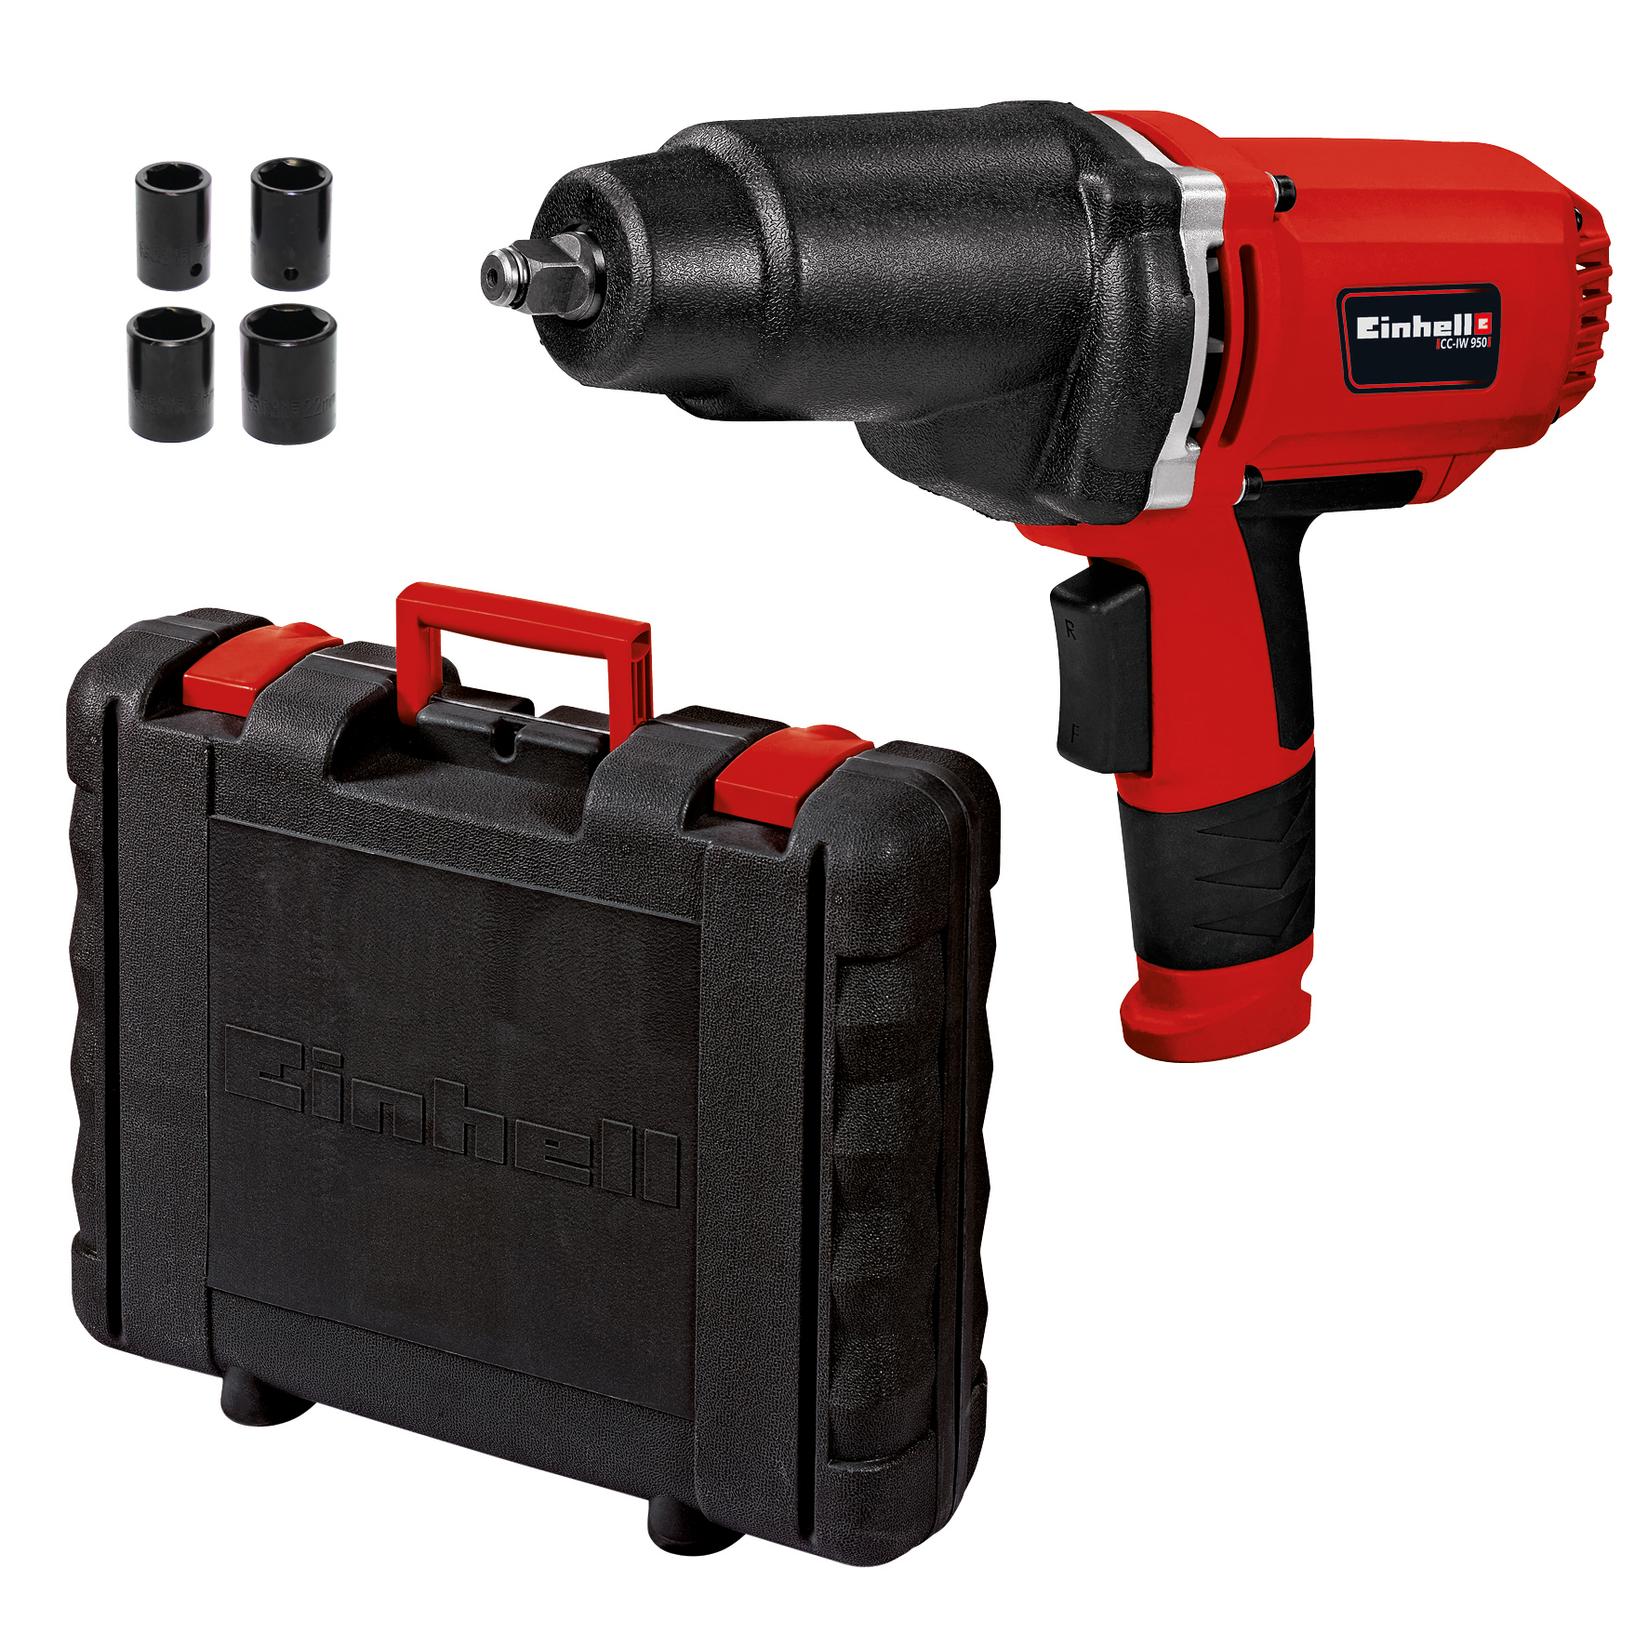 Selected image for Einhell CC-IW 950 Crno, Crveno 950 W